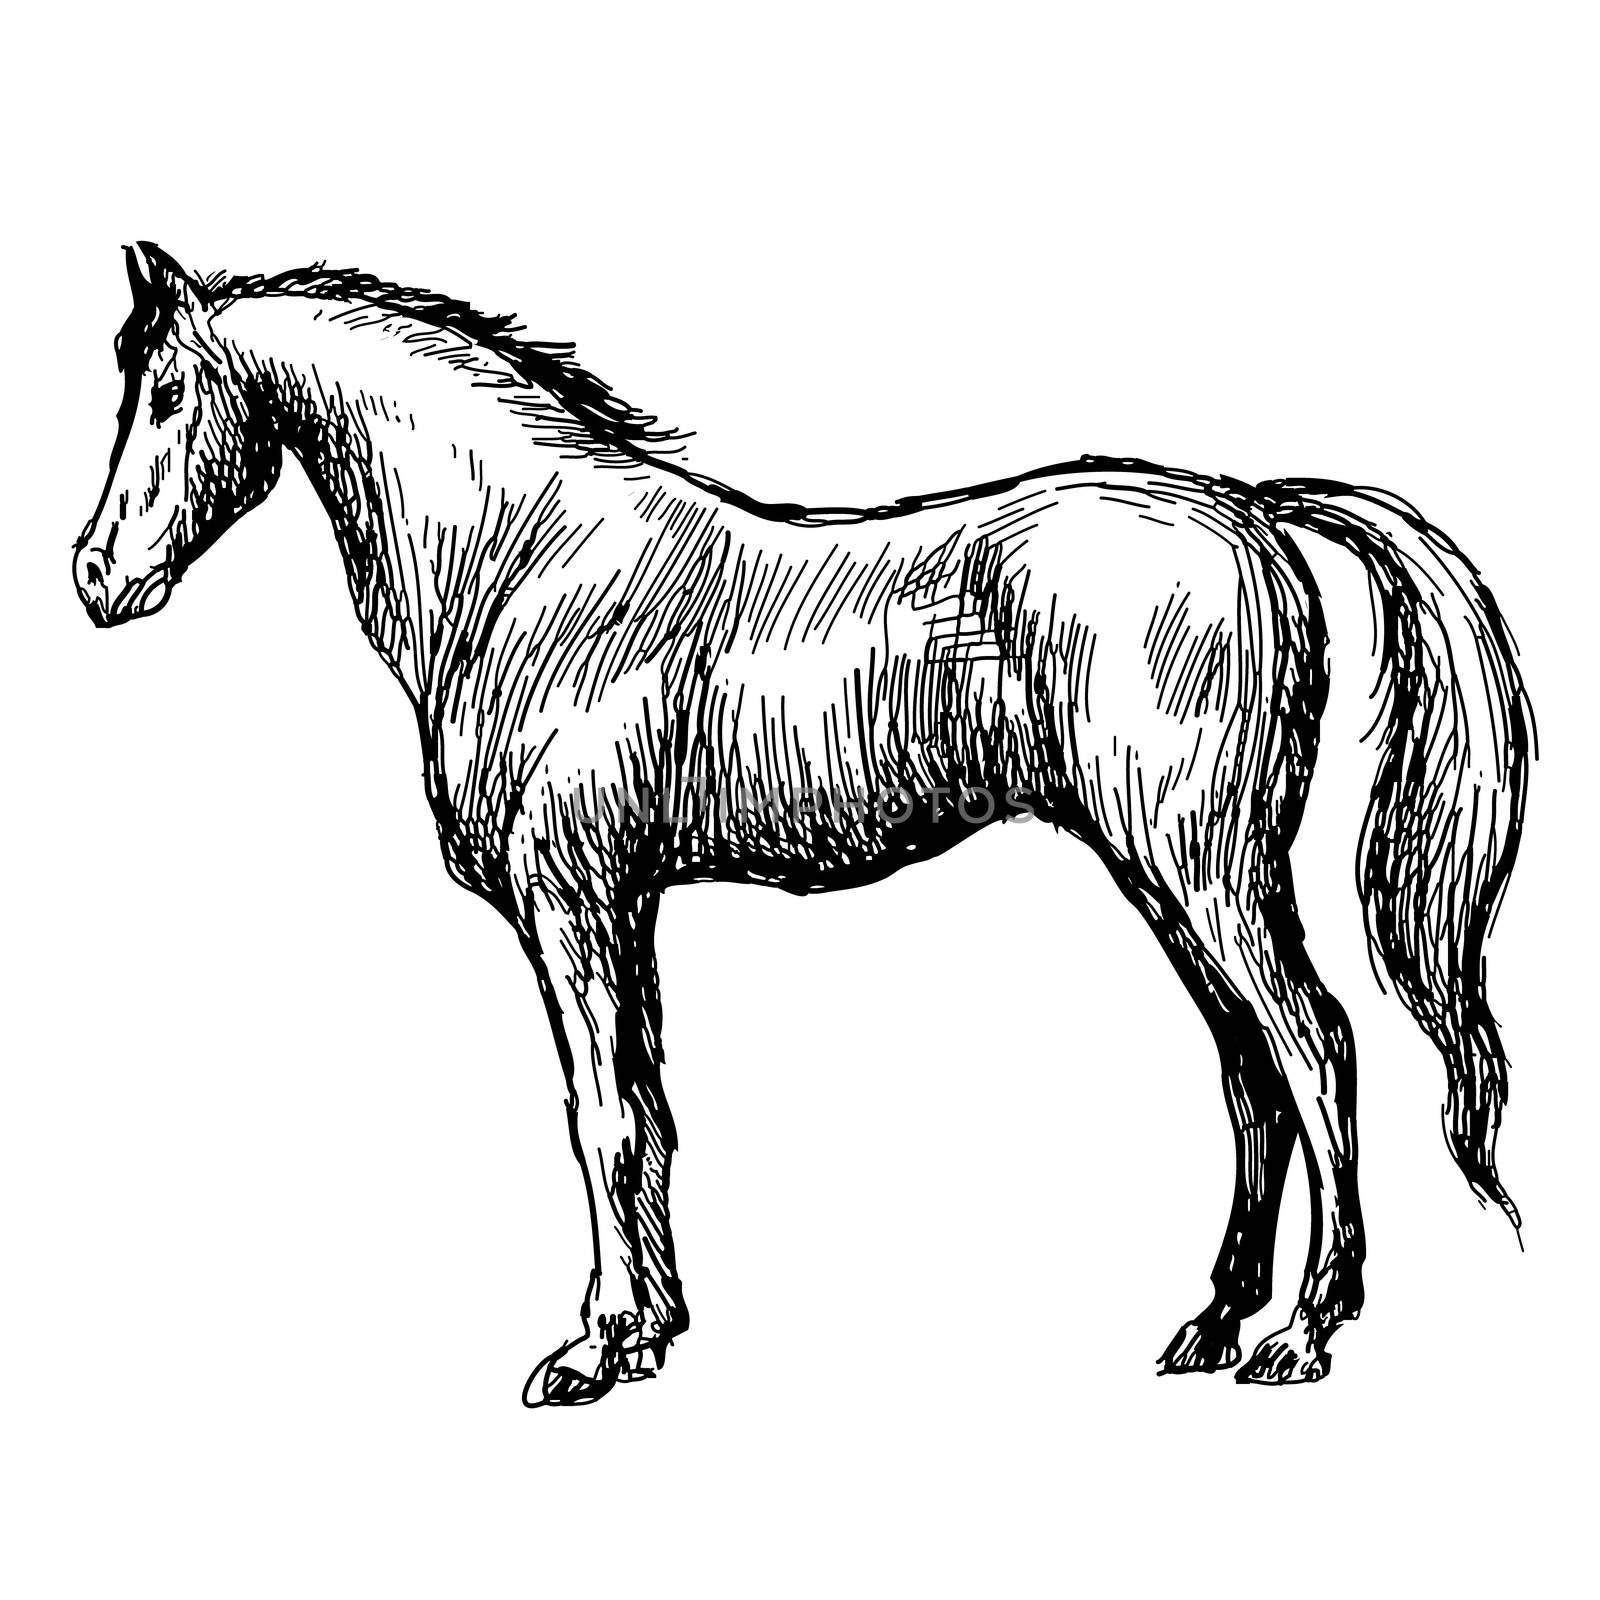 freehand sketch illustration of horse, doodle hand drawn